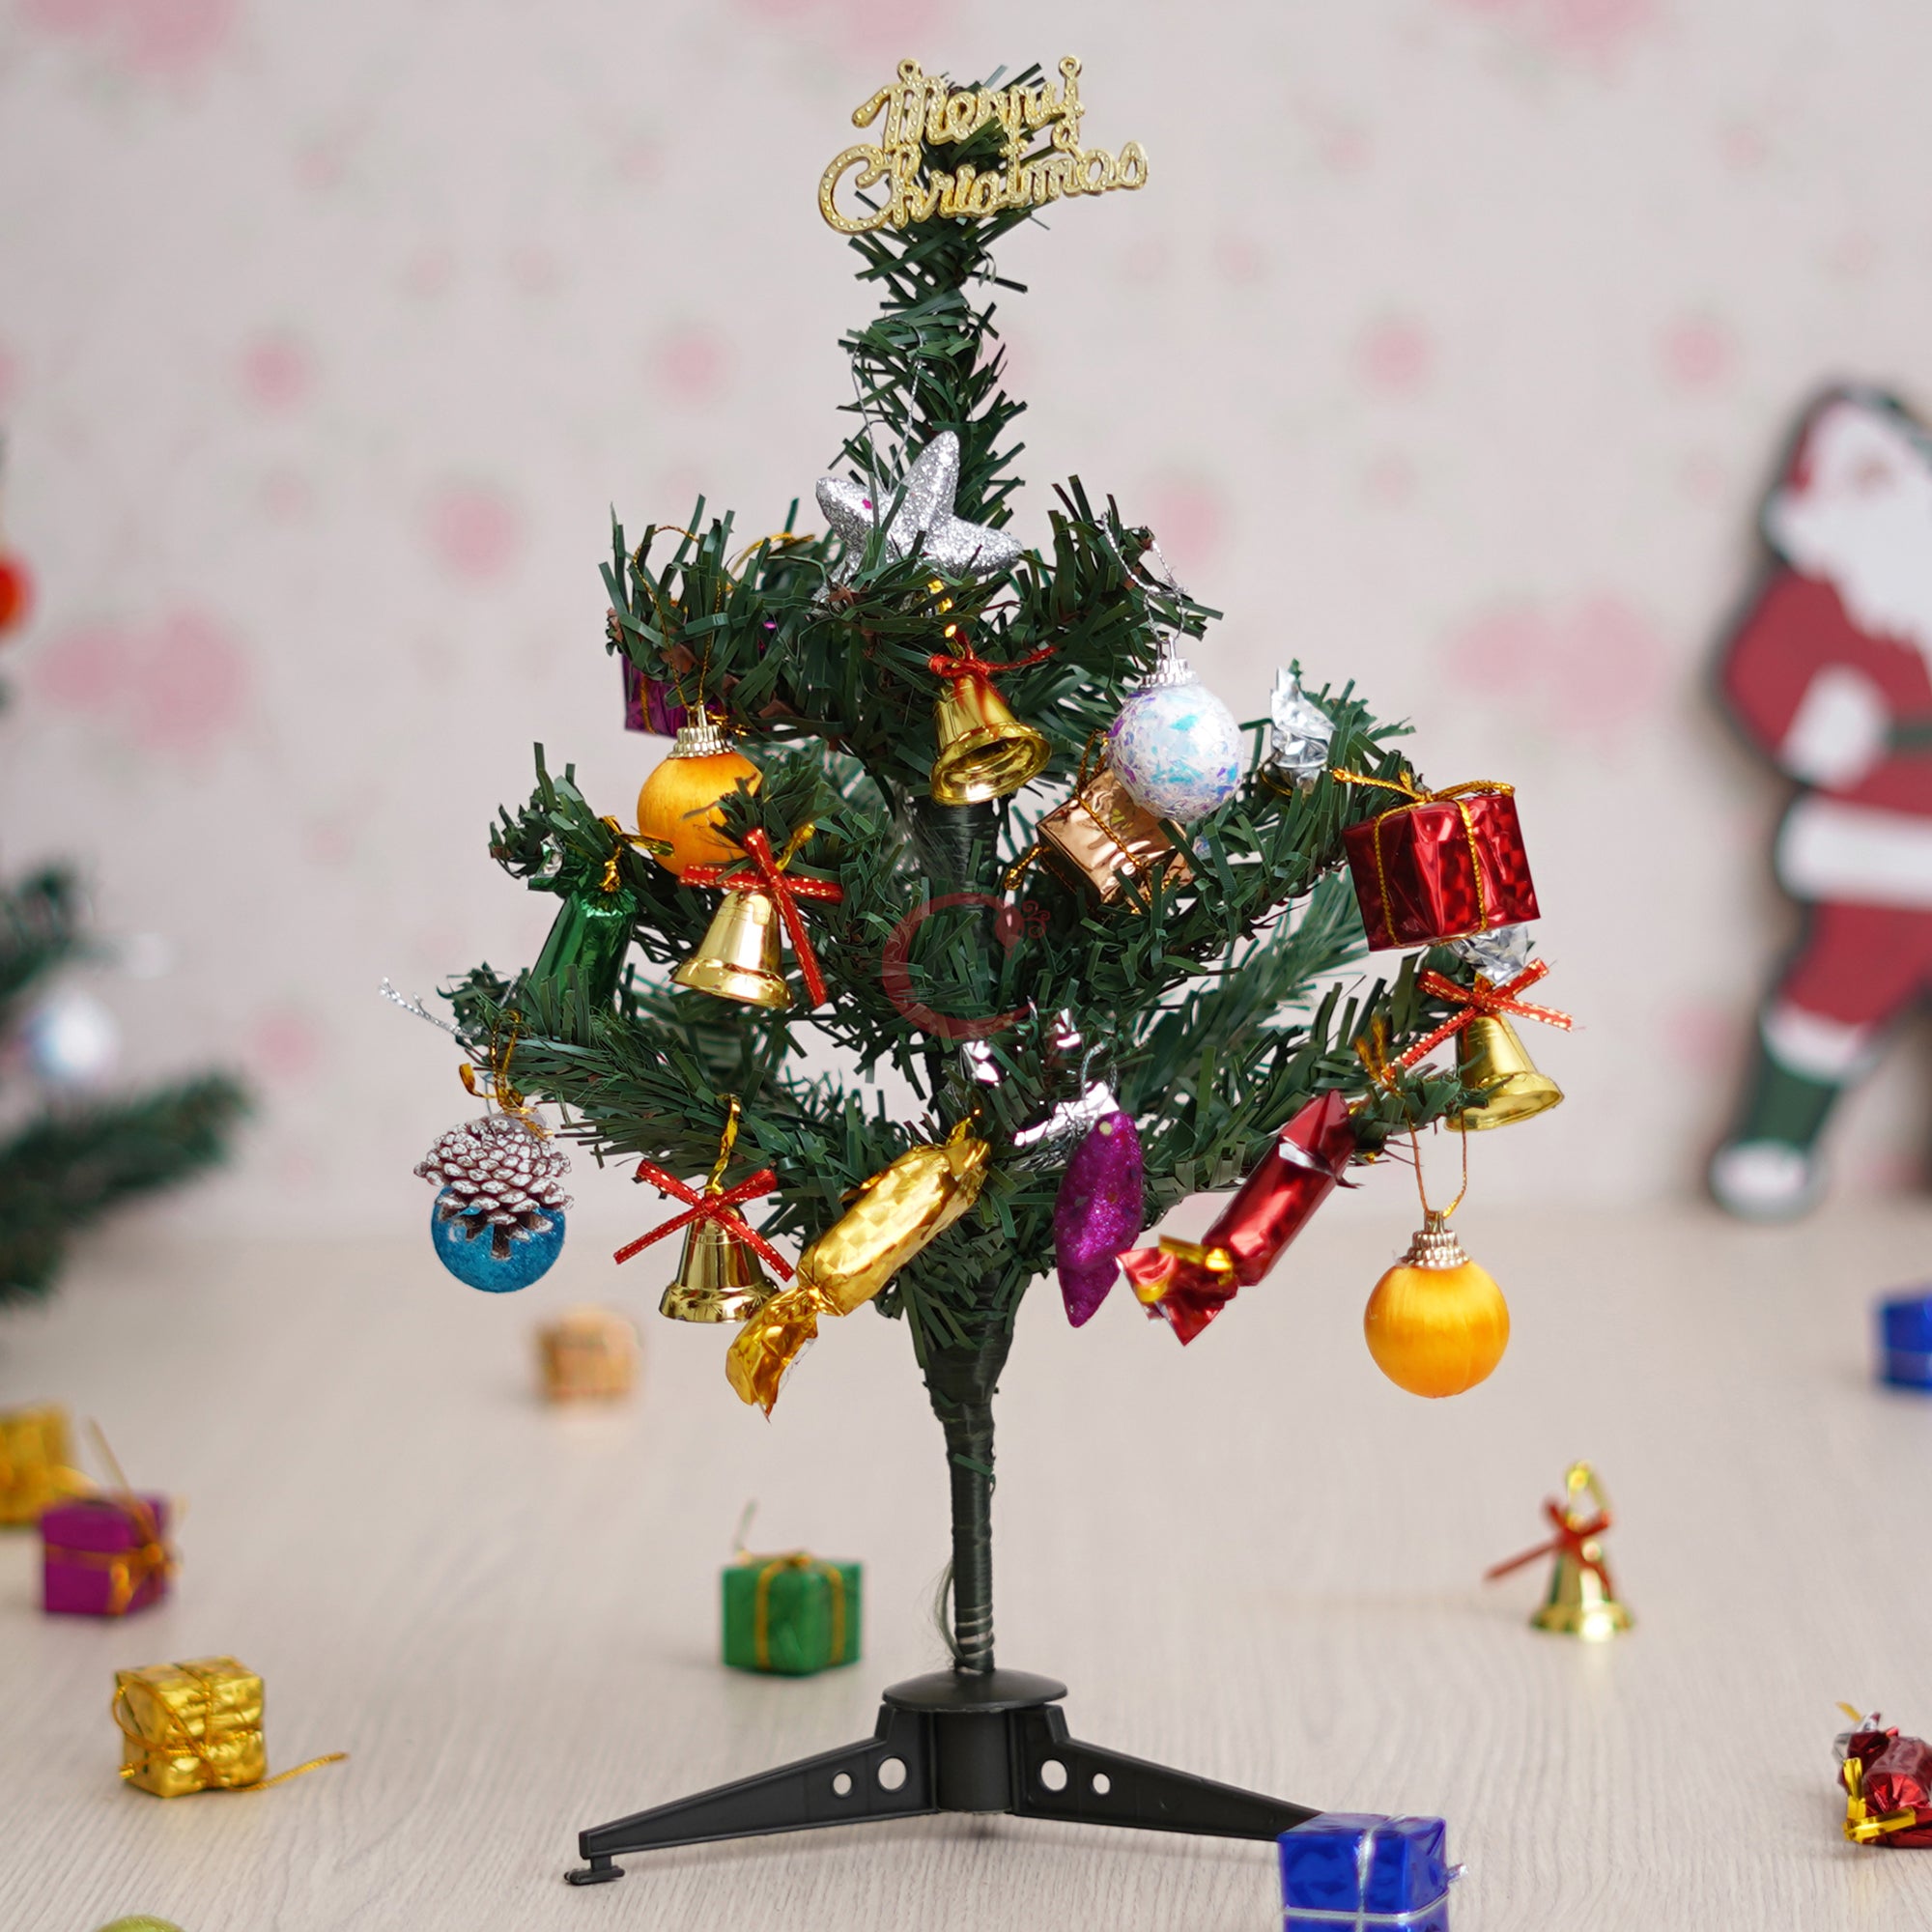 eCraftIndia 1 Feet Green Artificial Christmas Tree Xmas Pine Tree with Metal Stand - Xmas Tree for Indoor, Outdoor, Home, Living Room, Office, Church Decor - Merry Christmas Decoration Item 5